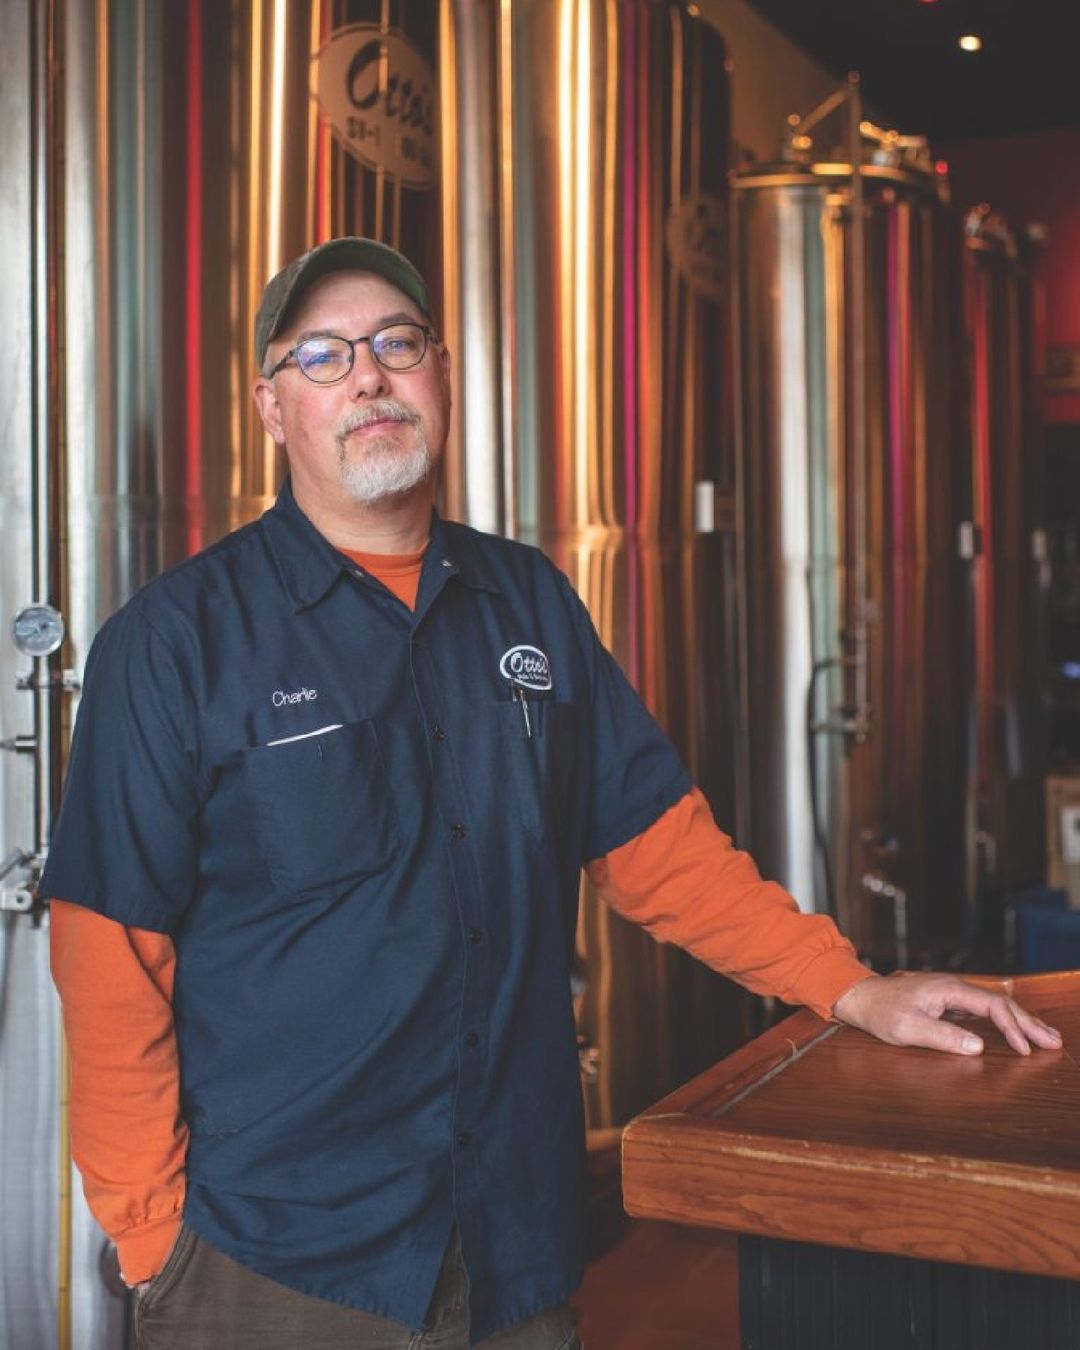 In 2022, @ottospubandbrewery will be celebrating 20 years of making some of central Pennsylvania’s finest beers, with special events and a special 20-year anniversary beer. 